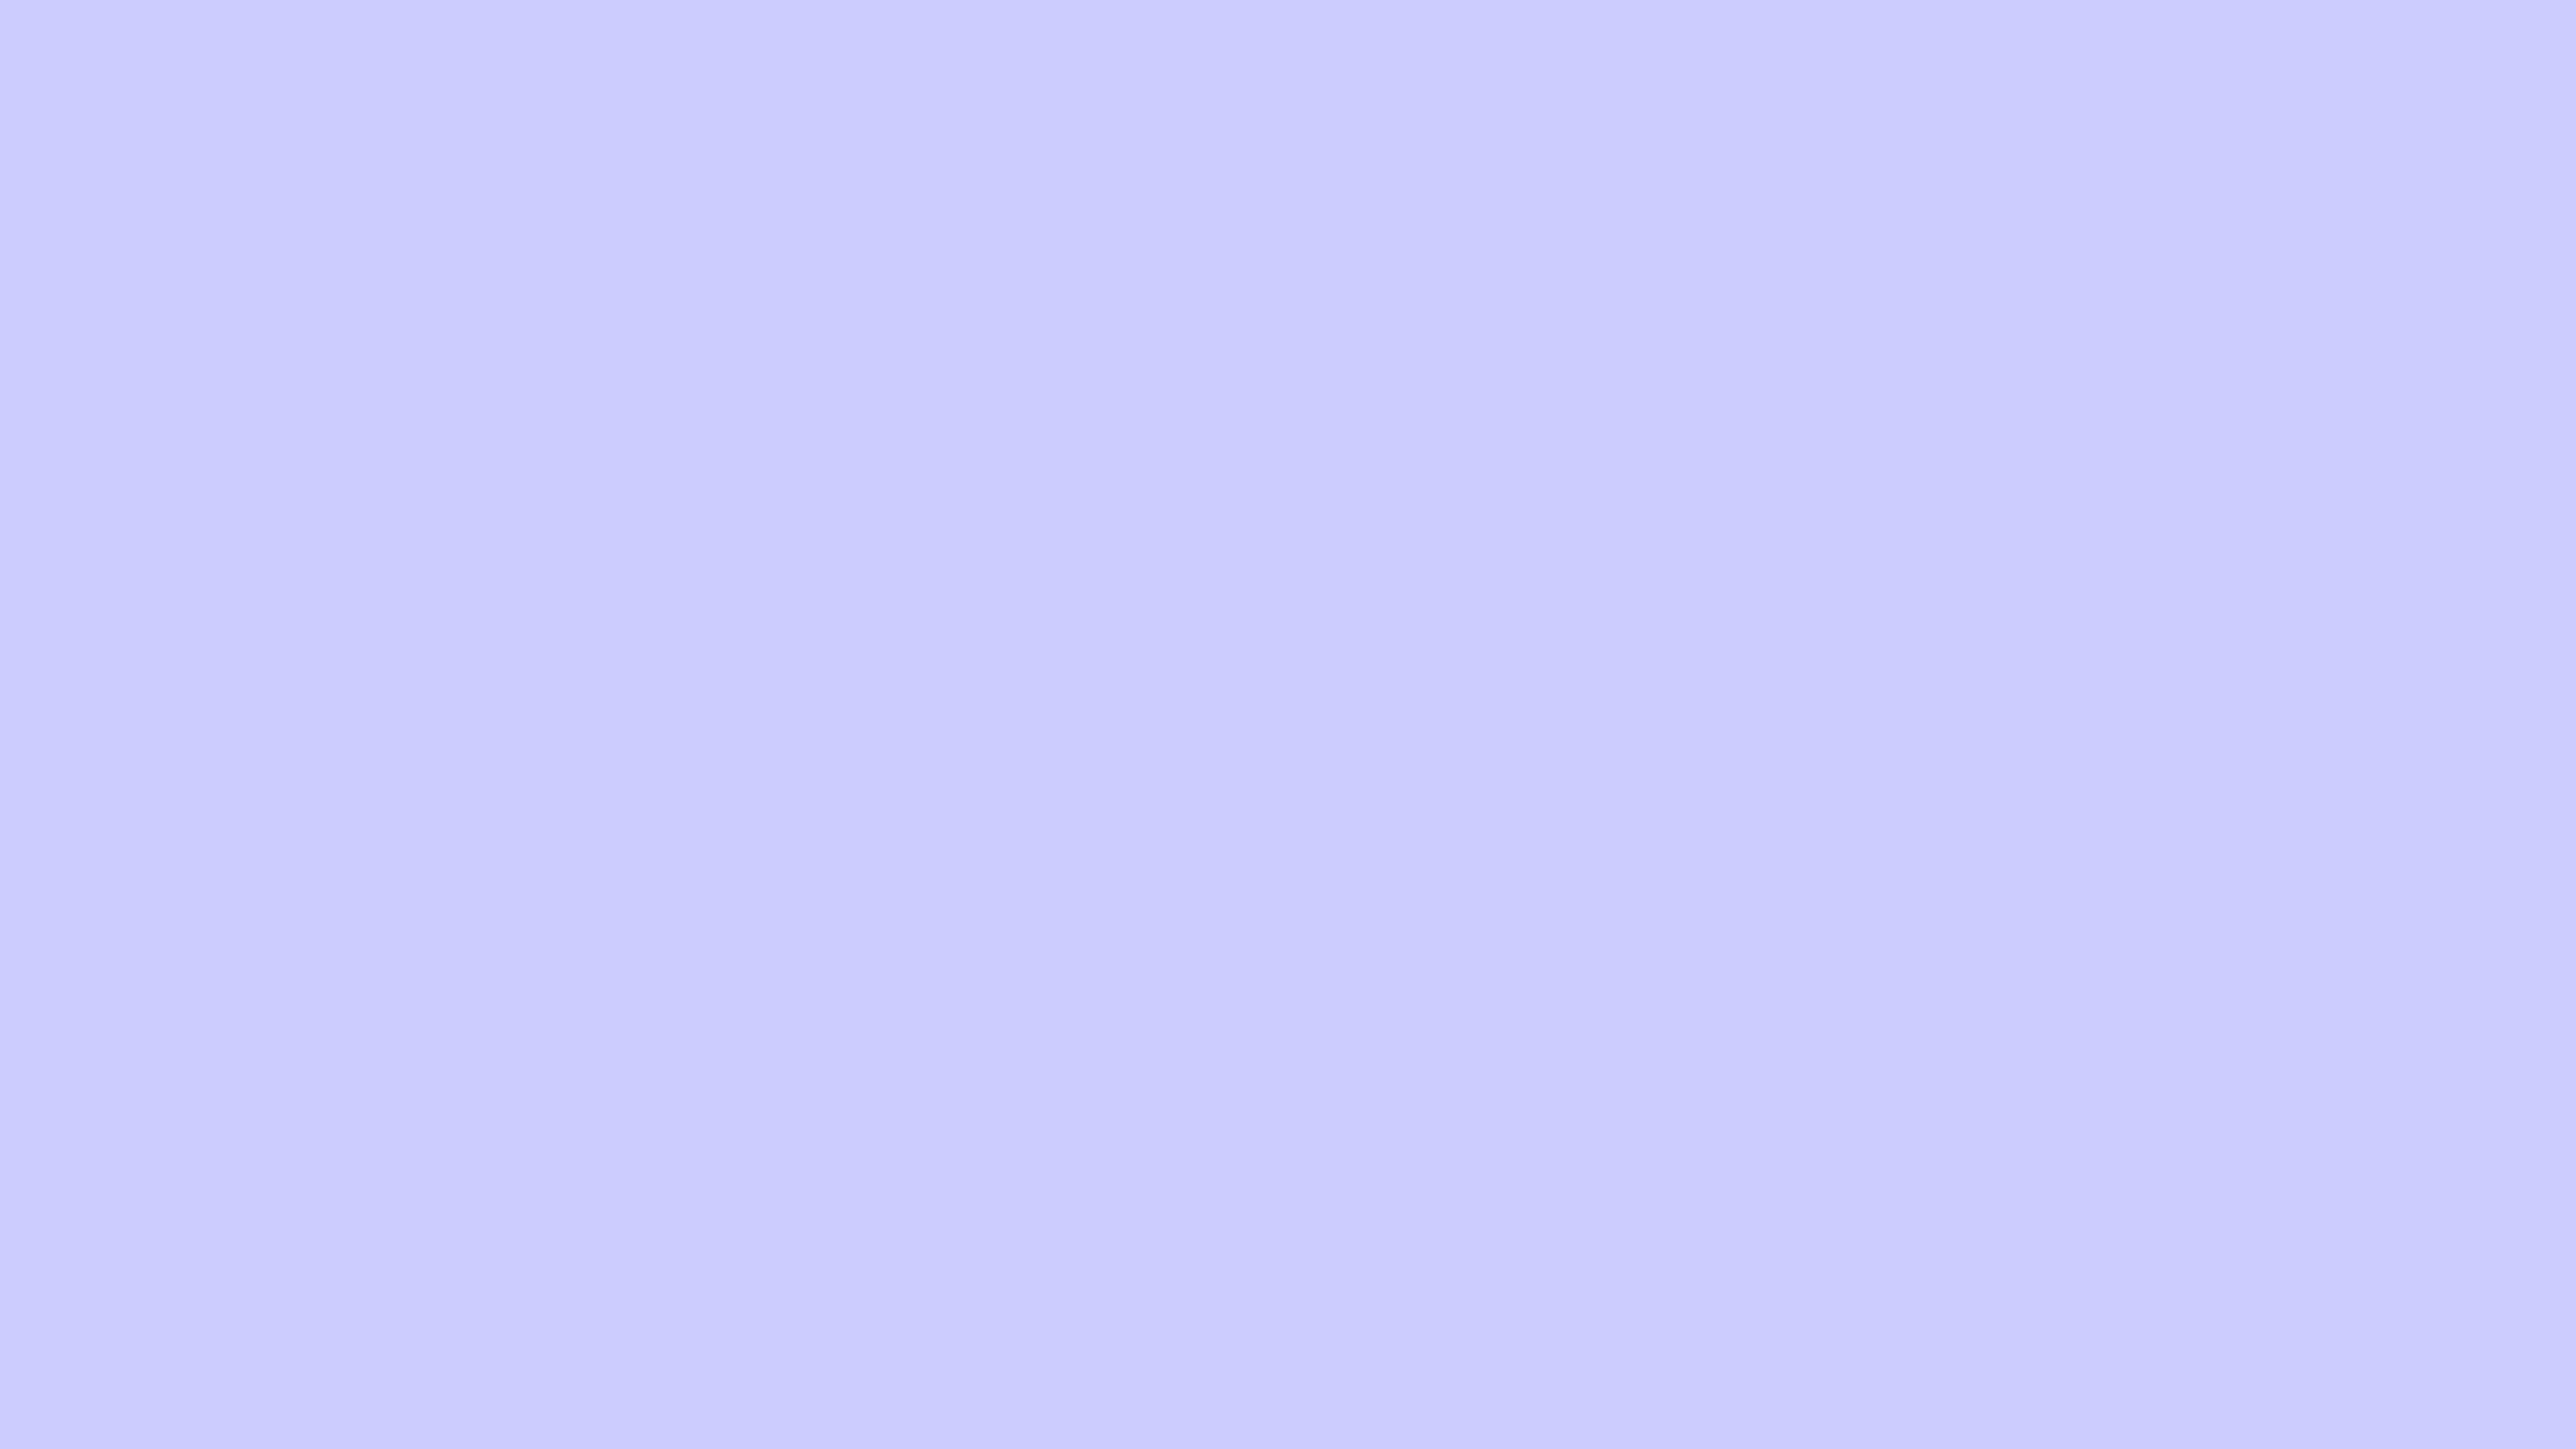 7680x4320 Periwinkle Solid Color Background